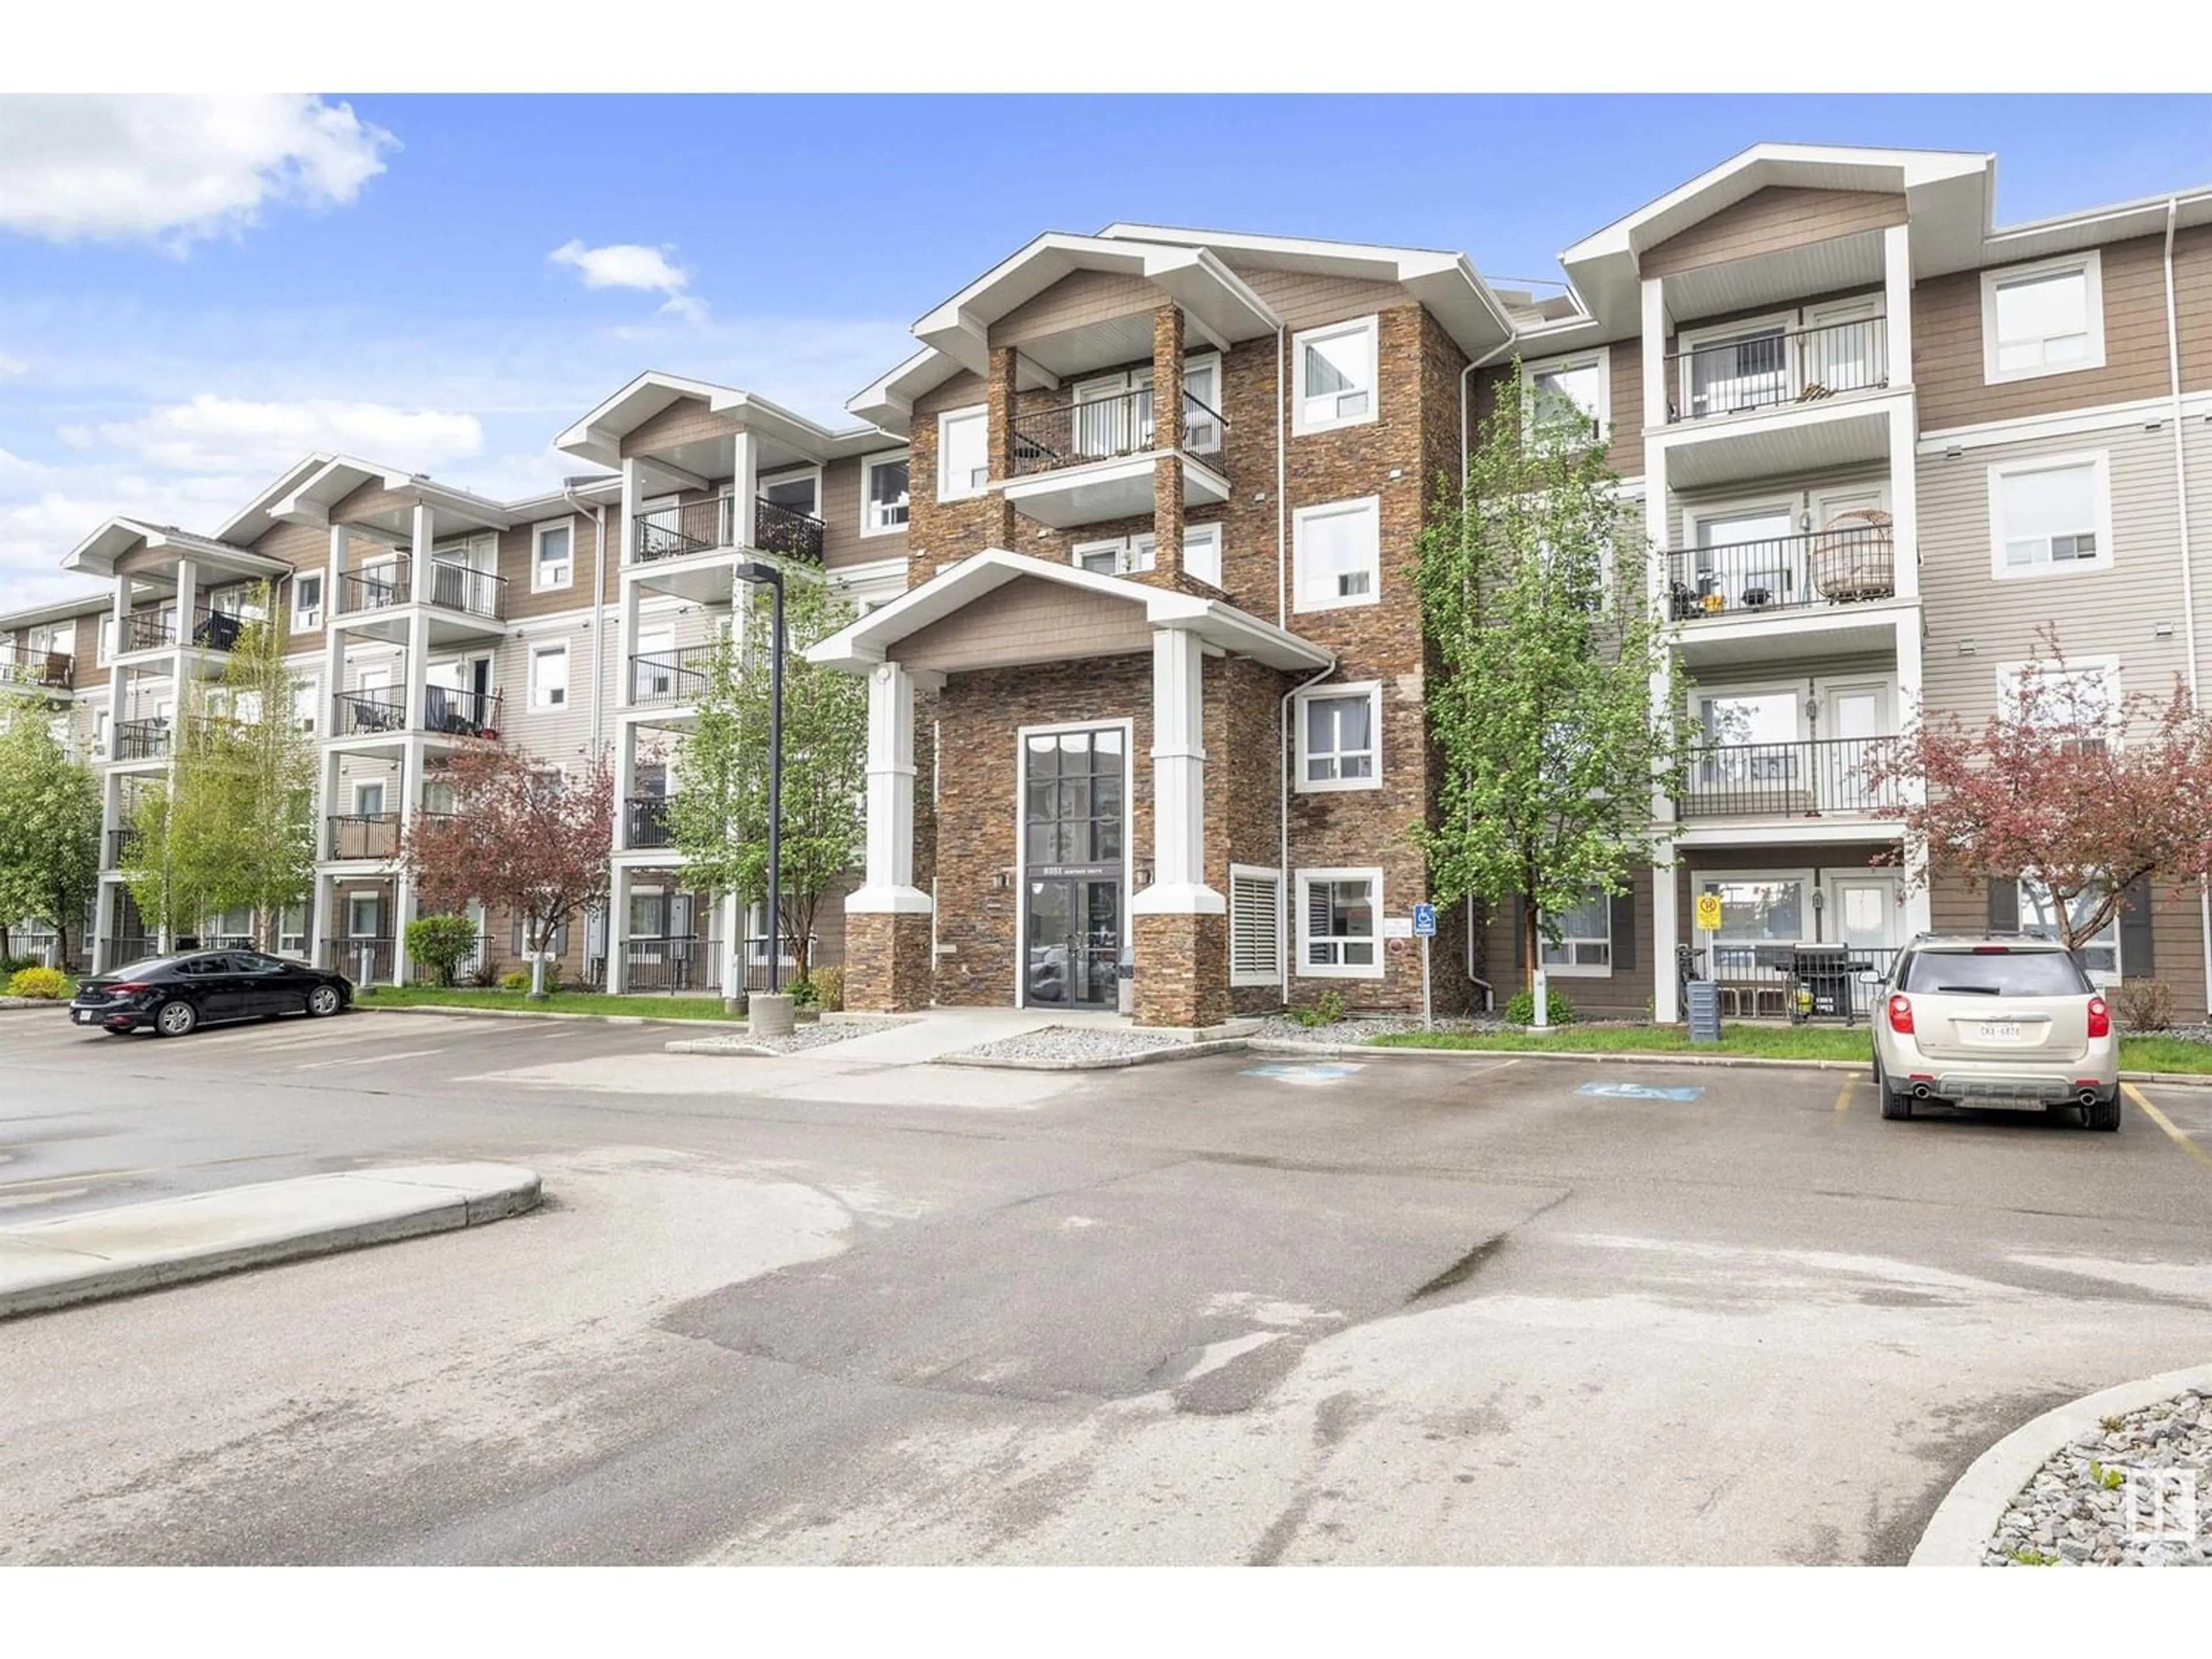 A pic from exterior of the house or condo for #3420 9351 SIMPSON DR NW, Edmonton Alberta T6R0N4